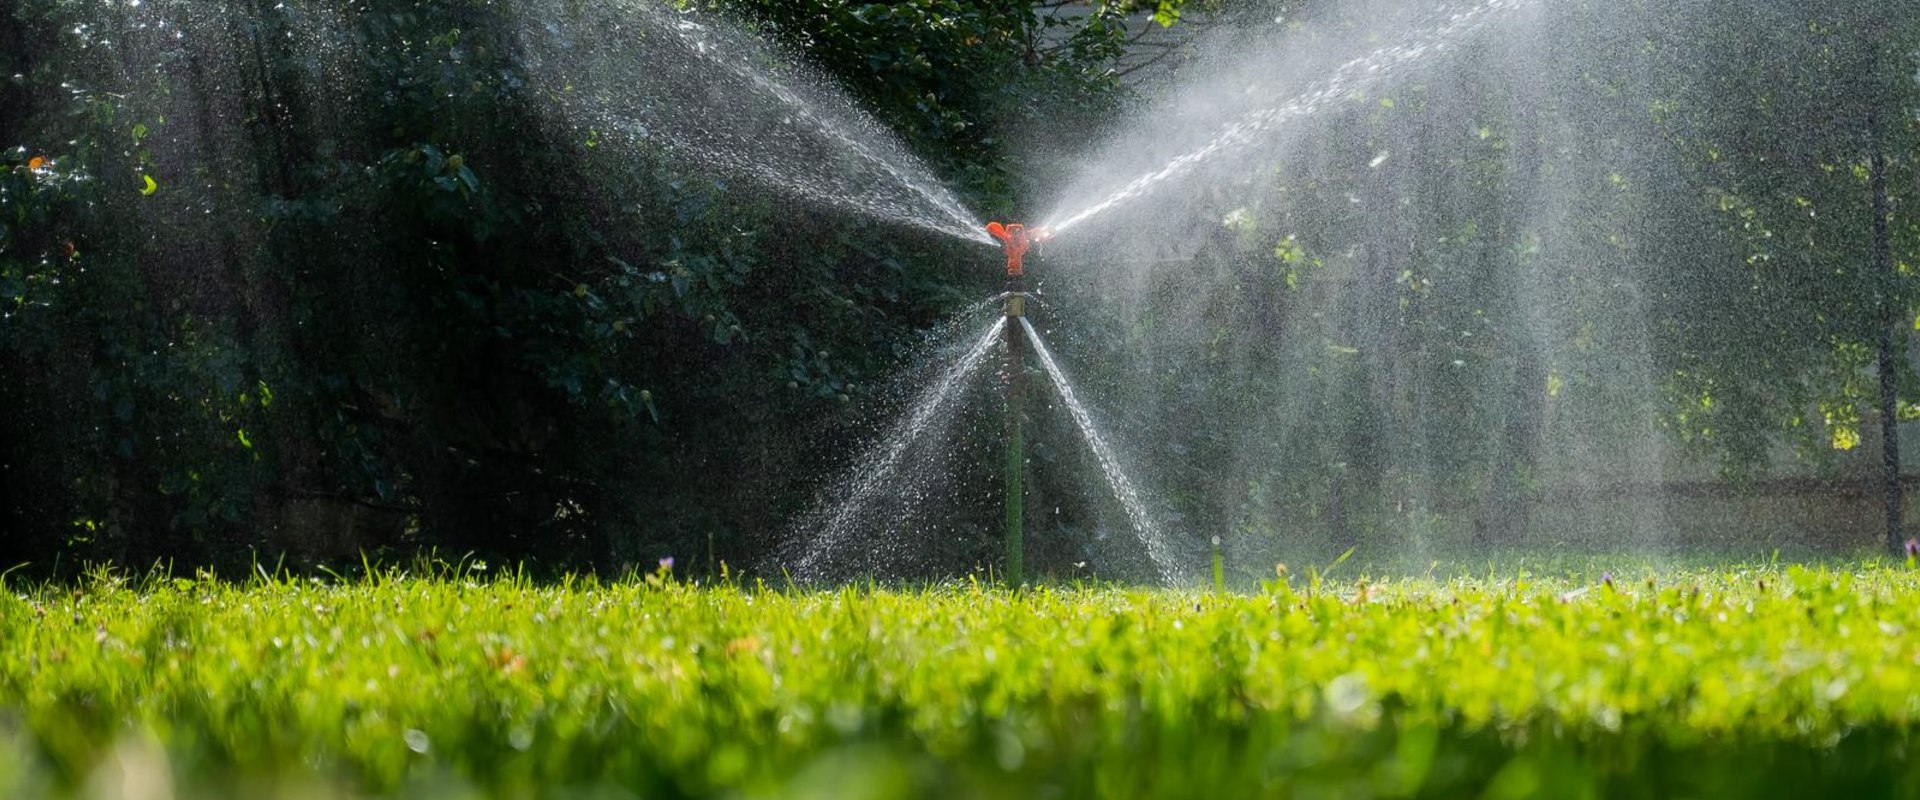 How To Choose The Best Sprinkler For Your Grass Seeds In Omaha